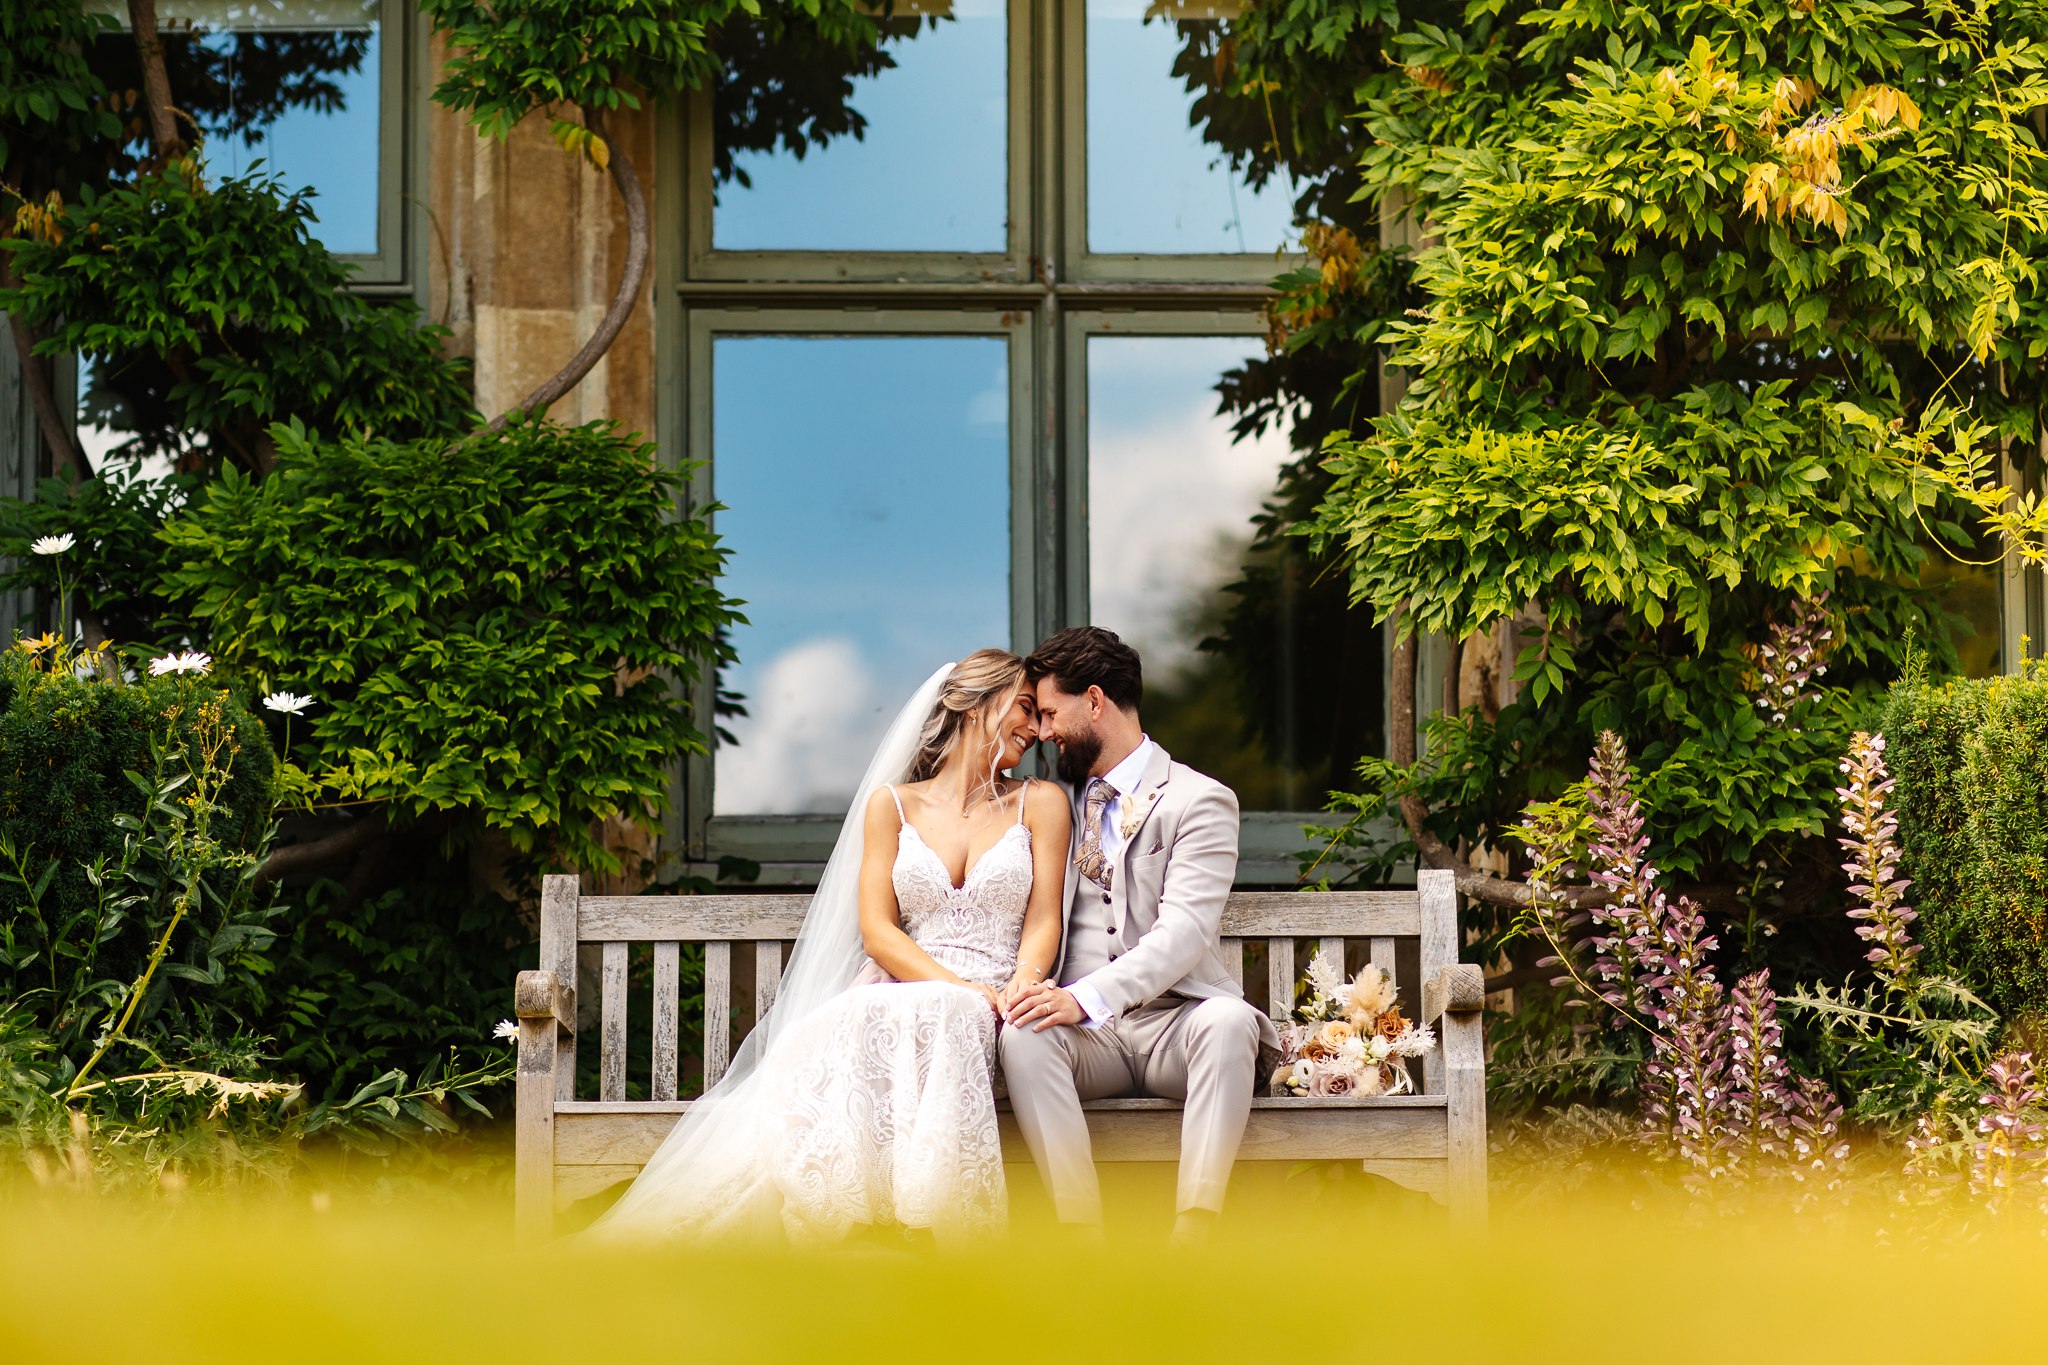 bride and groom sitting together closely on bench in gardens at ashridge house, surrounded by wisteria plants 